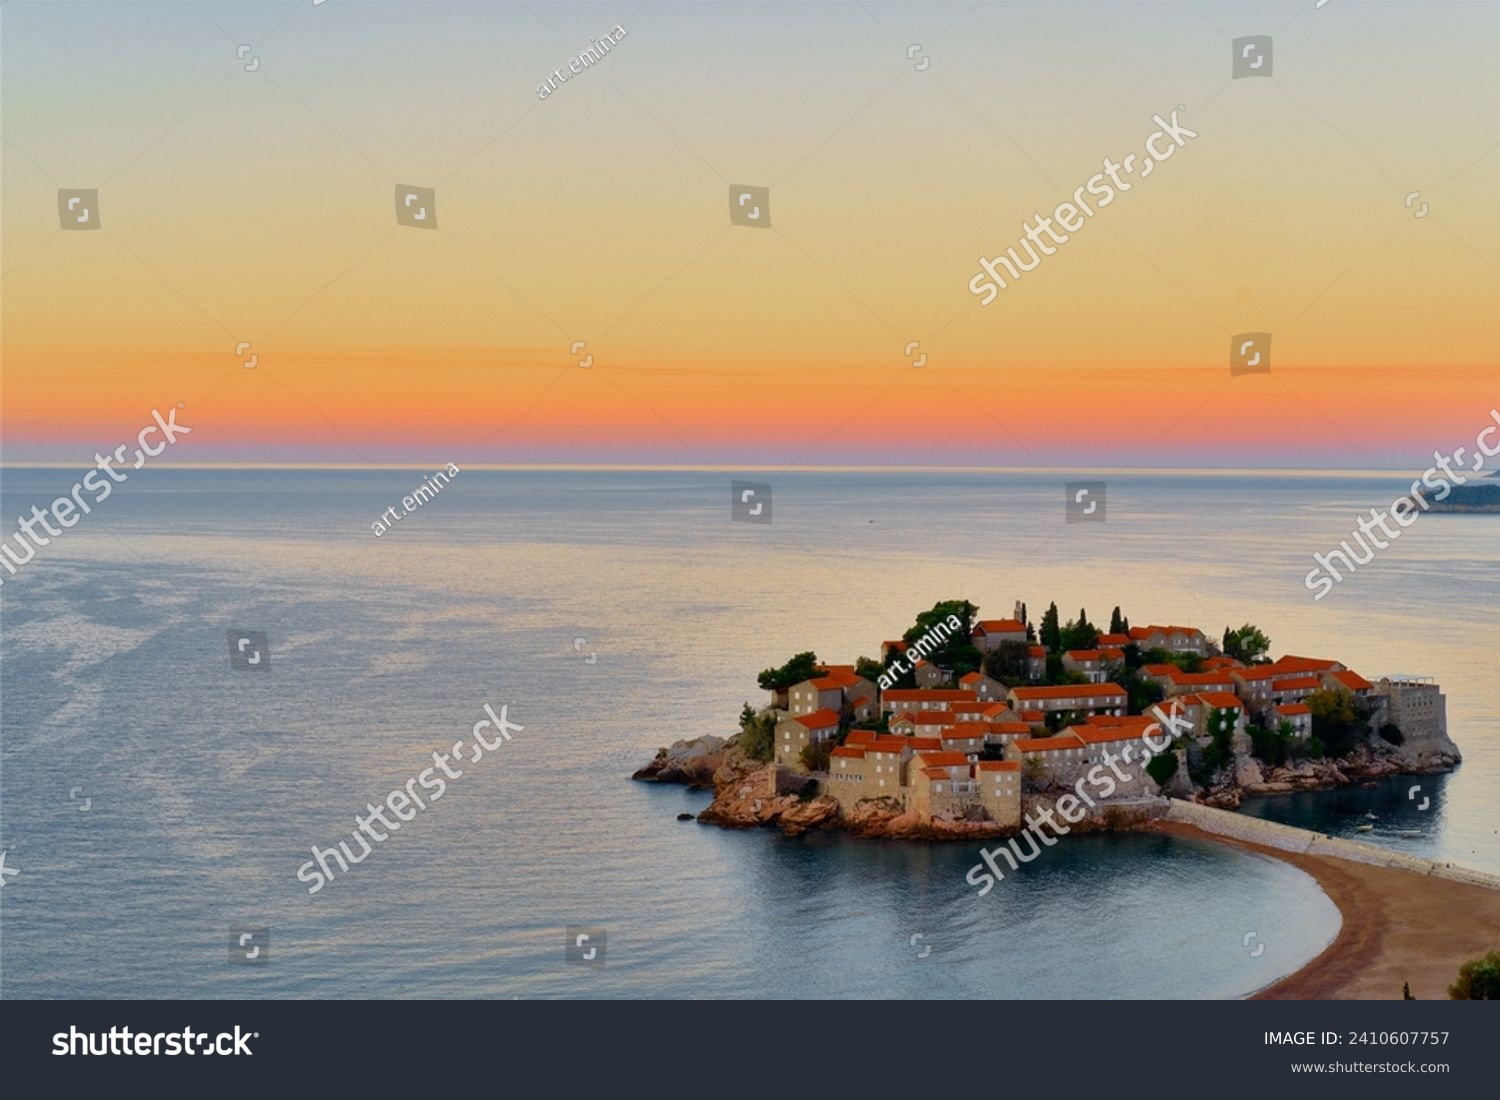 Sveti Stefan at sunset. Deserted winter beach. Colorful sky reflecting in the Adriatic sea and old stone houses. #2410607757